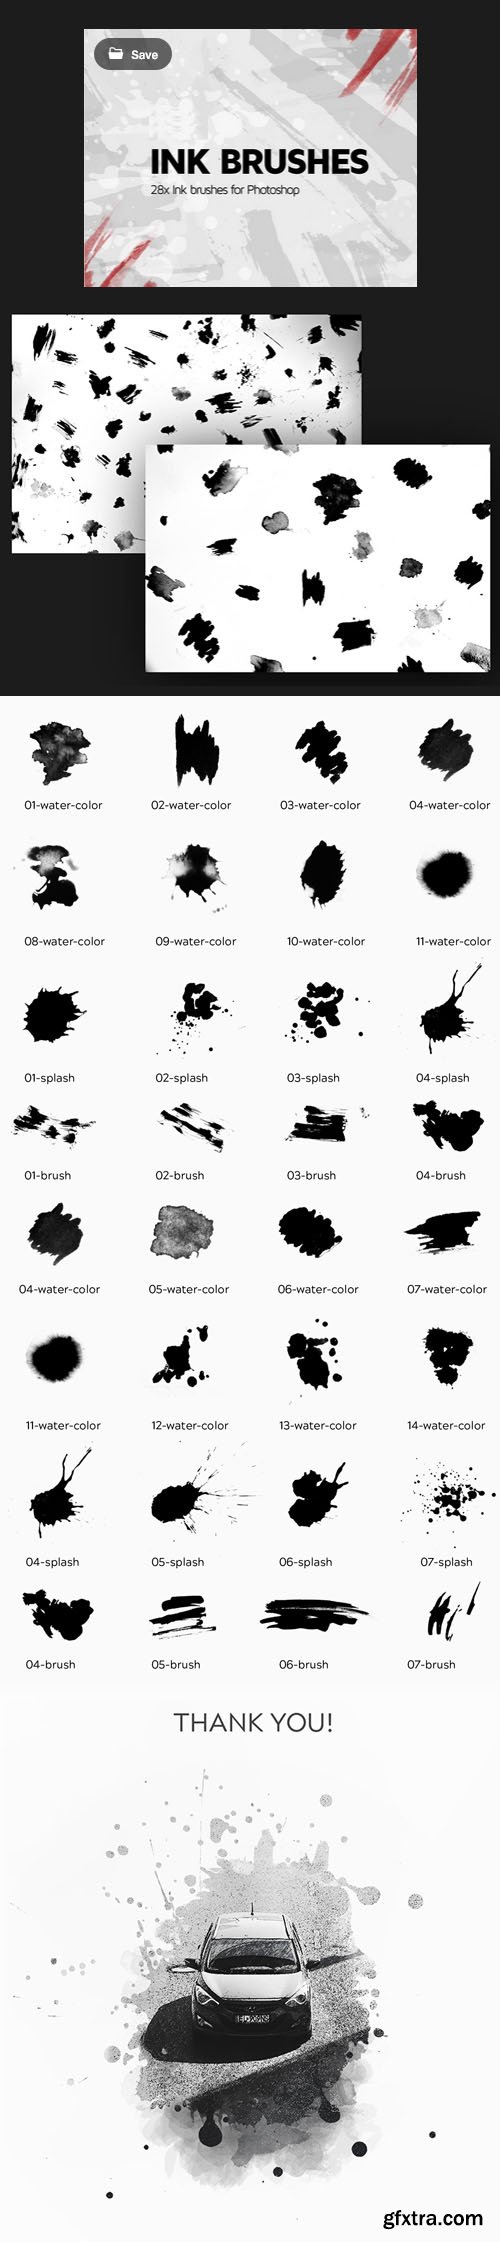 28 Ink Brushes for Photoshop